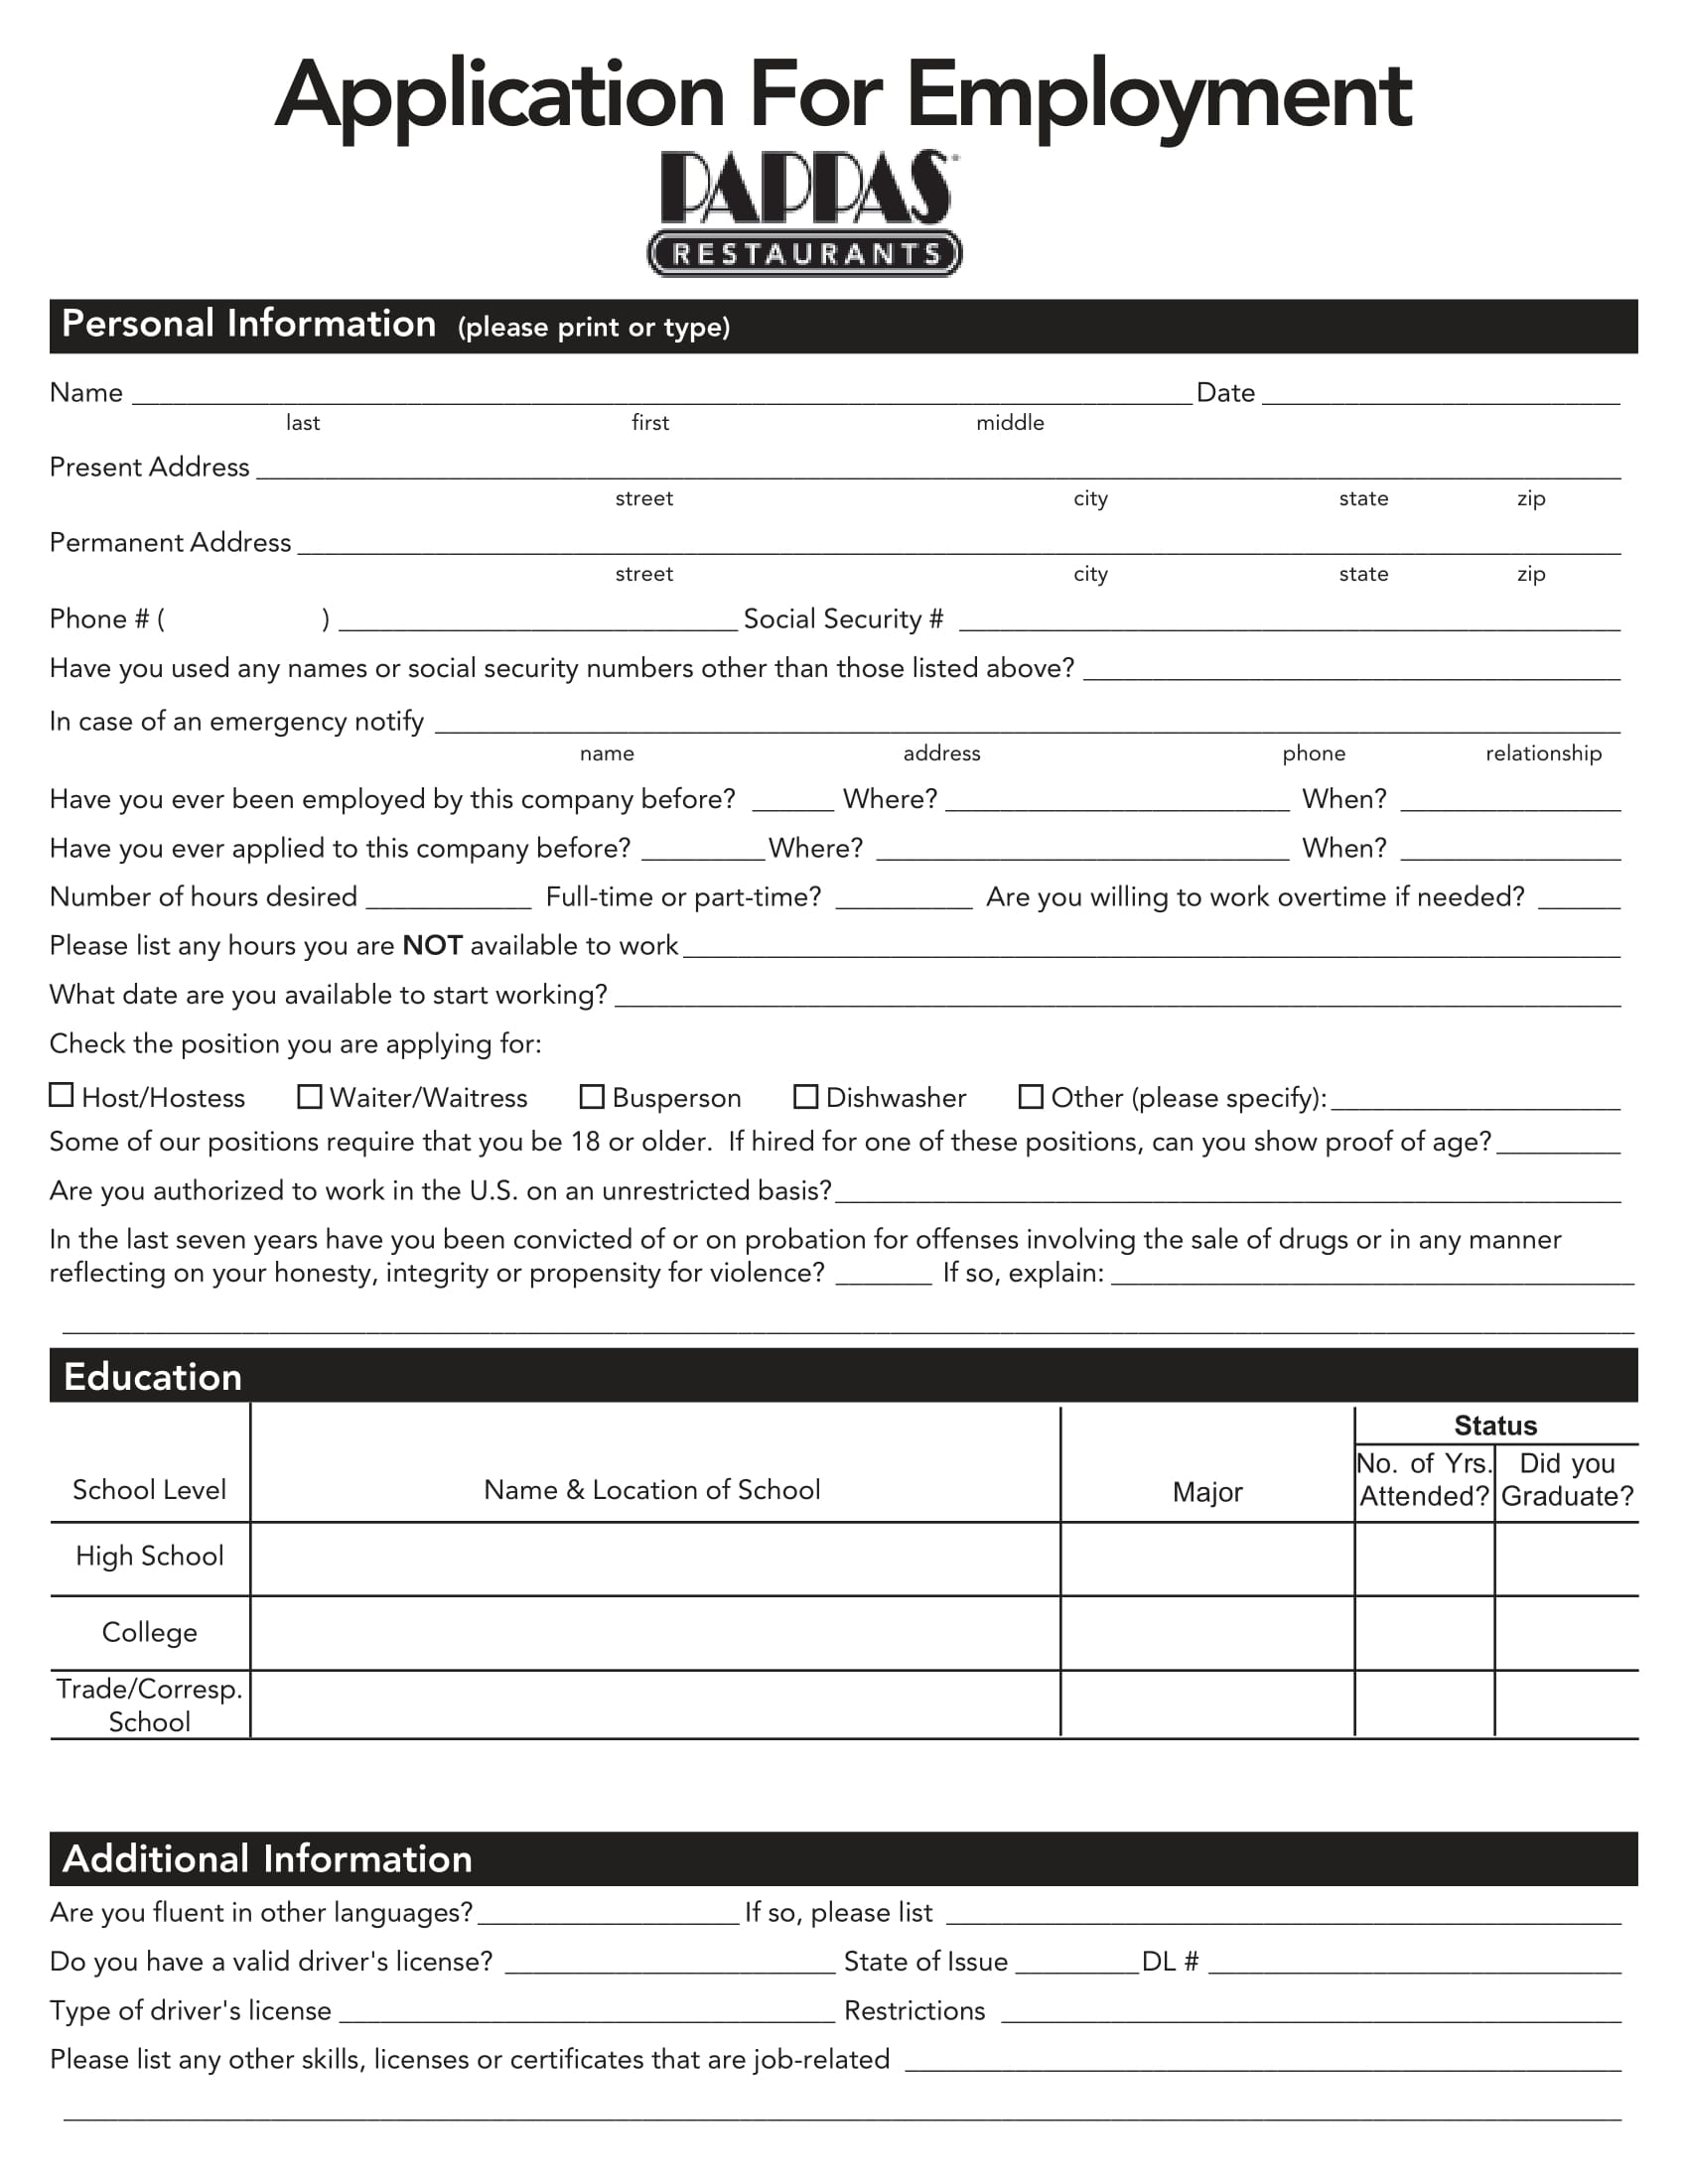 barbecue catering restaurant employment application form 1